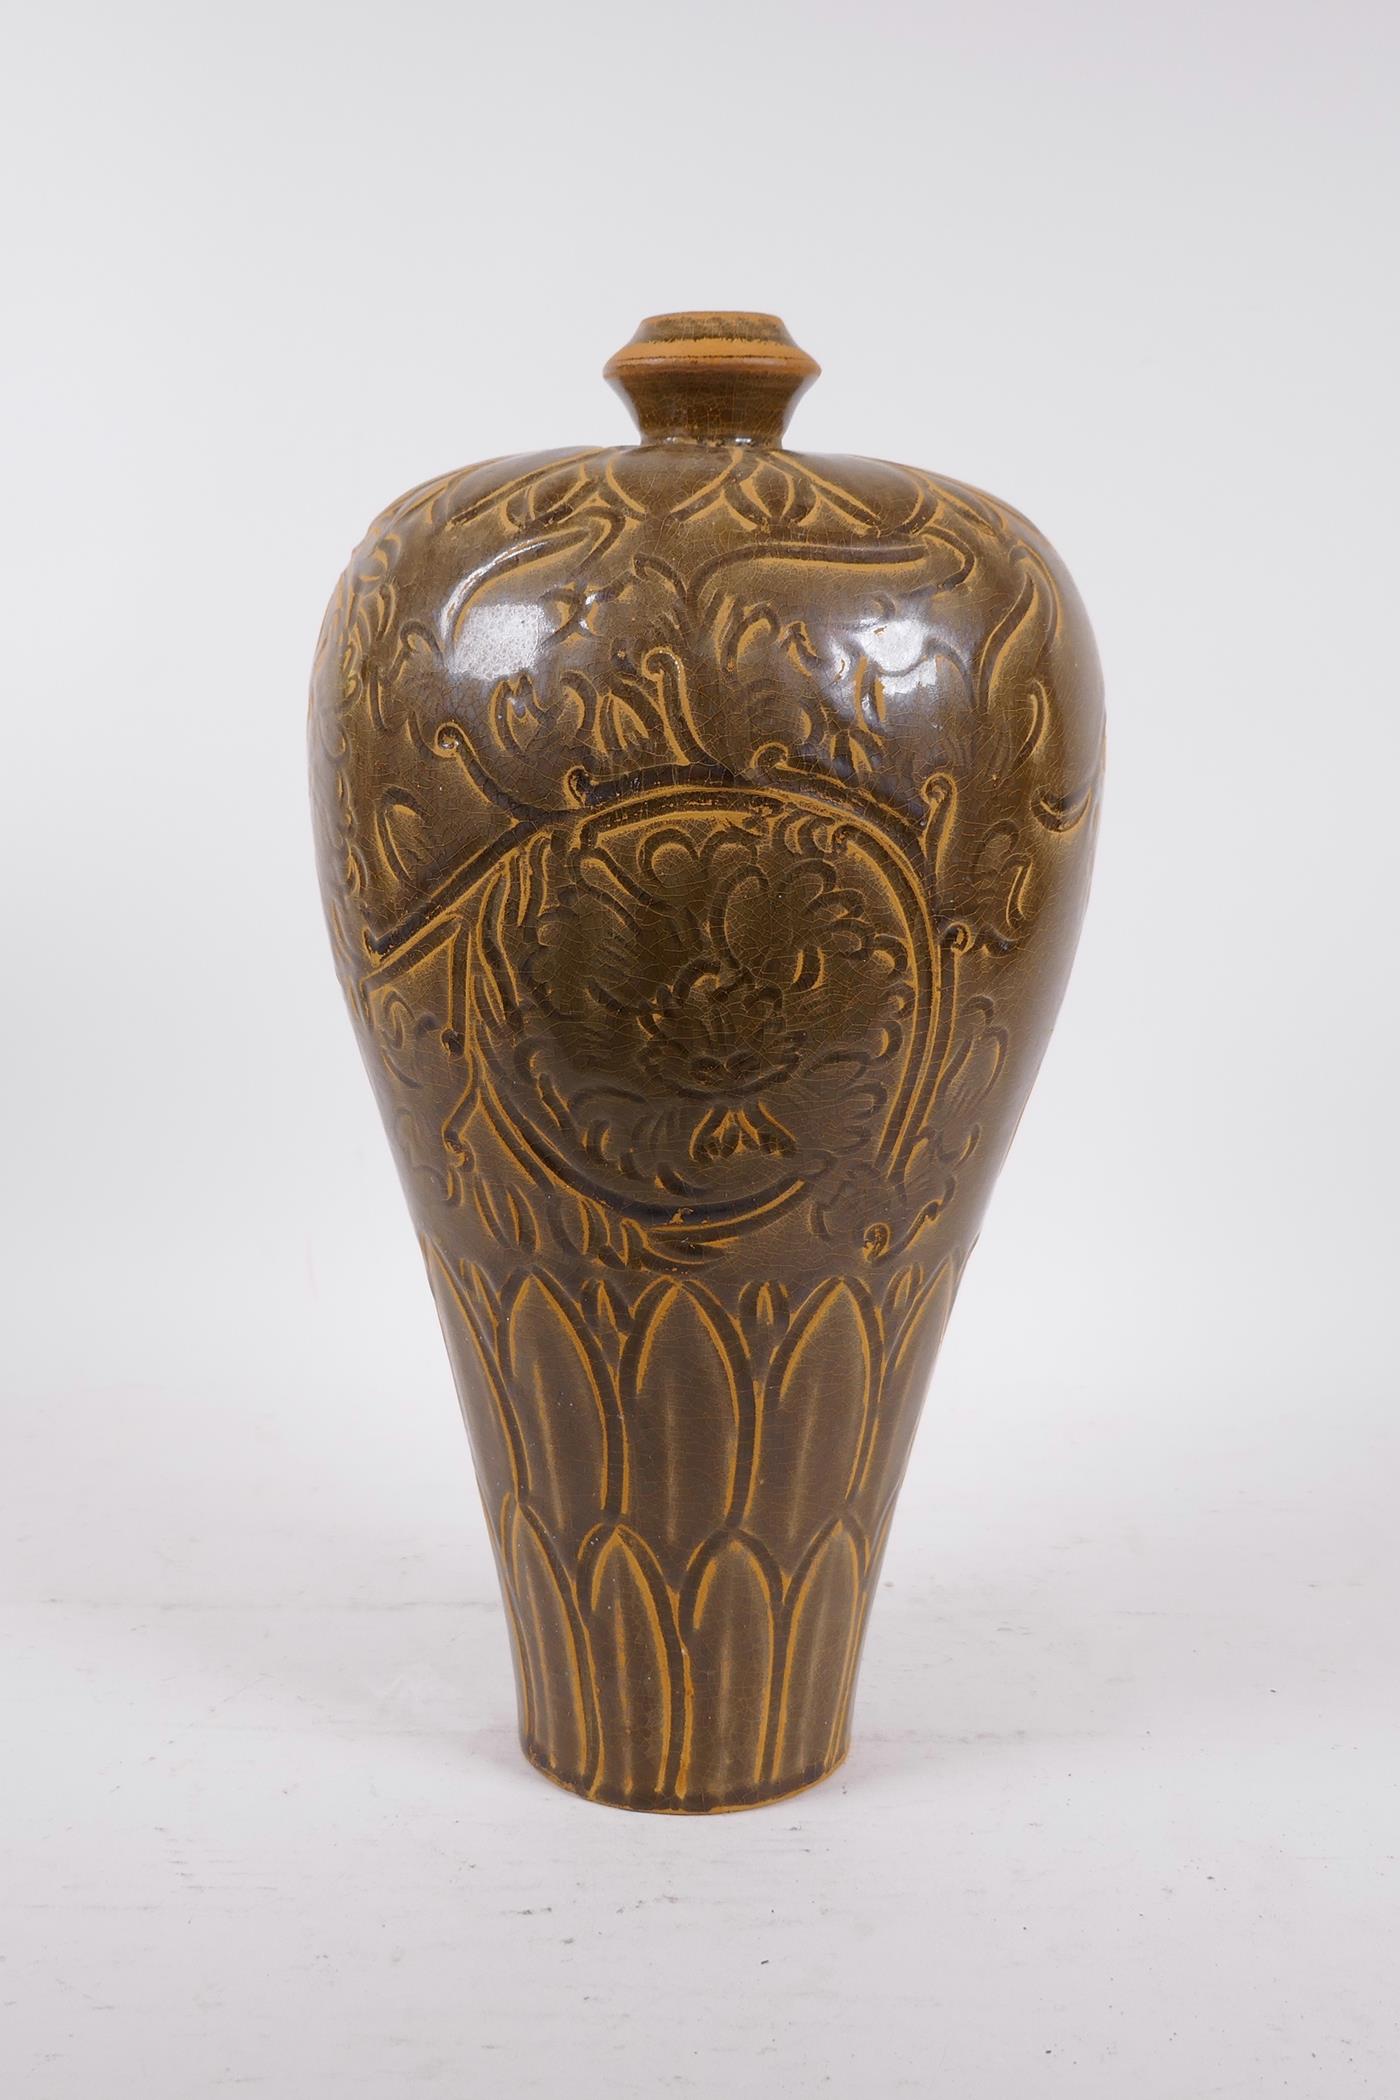 A Cizhou green glazed ceramic vase, with incised decoration of a dancing boy, 13" high - Image 4 of 5